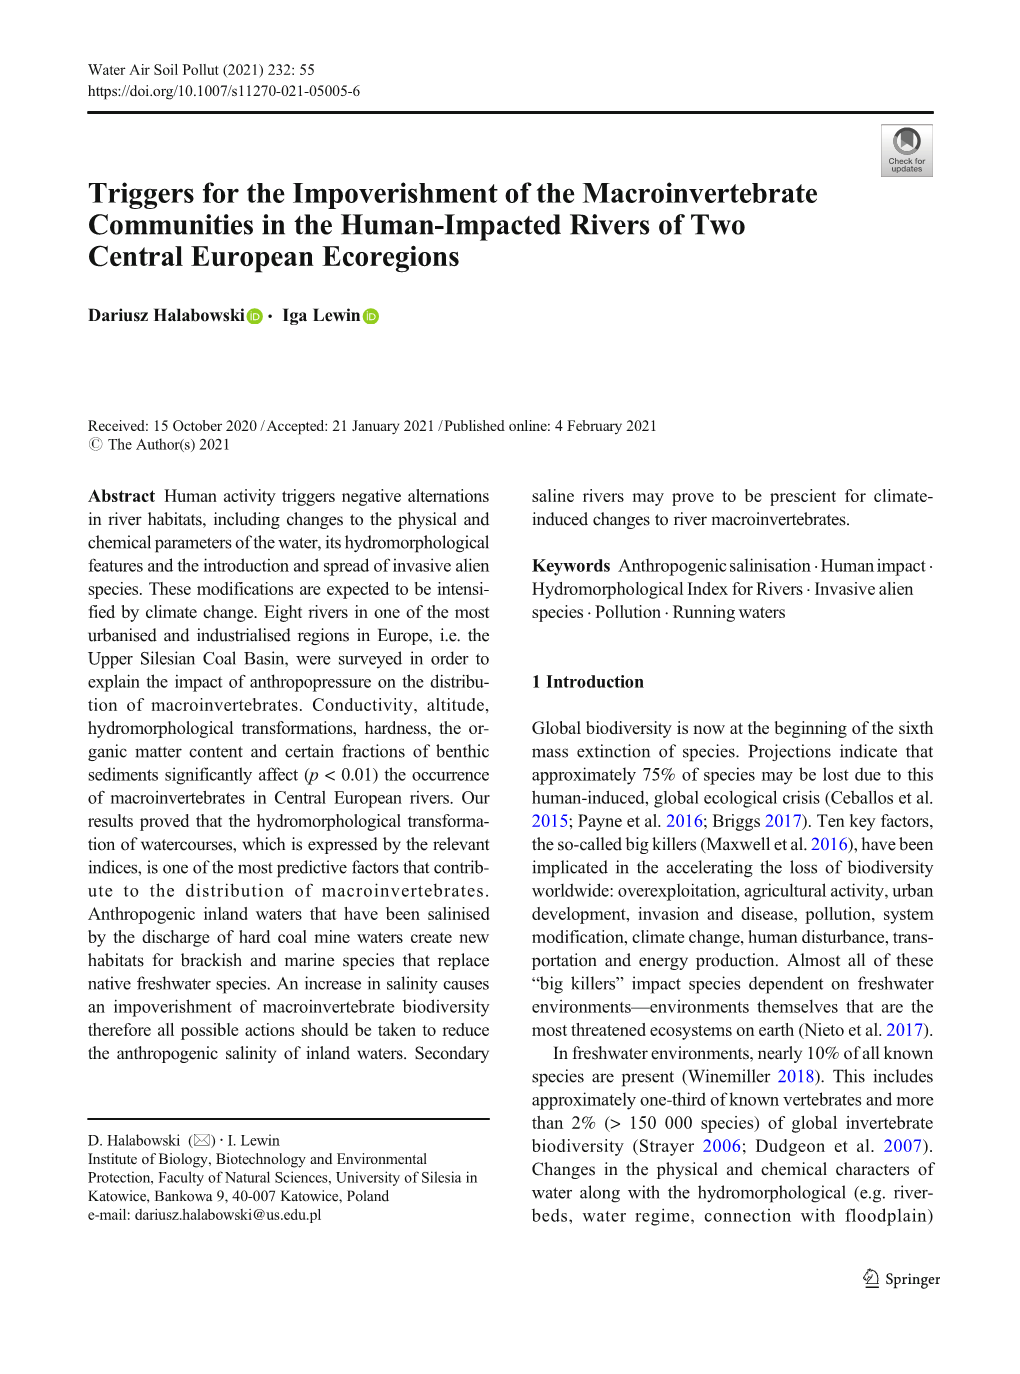 Triggers for the Impoverishment of the Macroinvertebrate Communities in the Human-Impacted Rivers of Two Central European Ecoregions